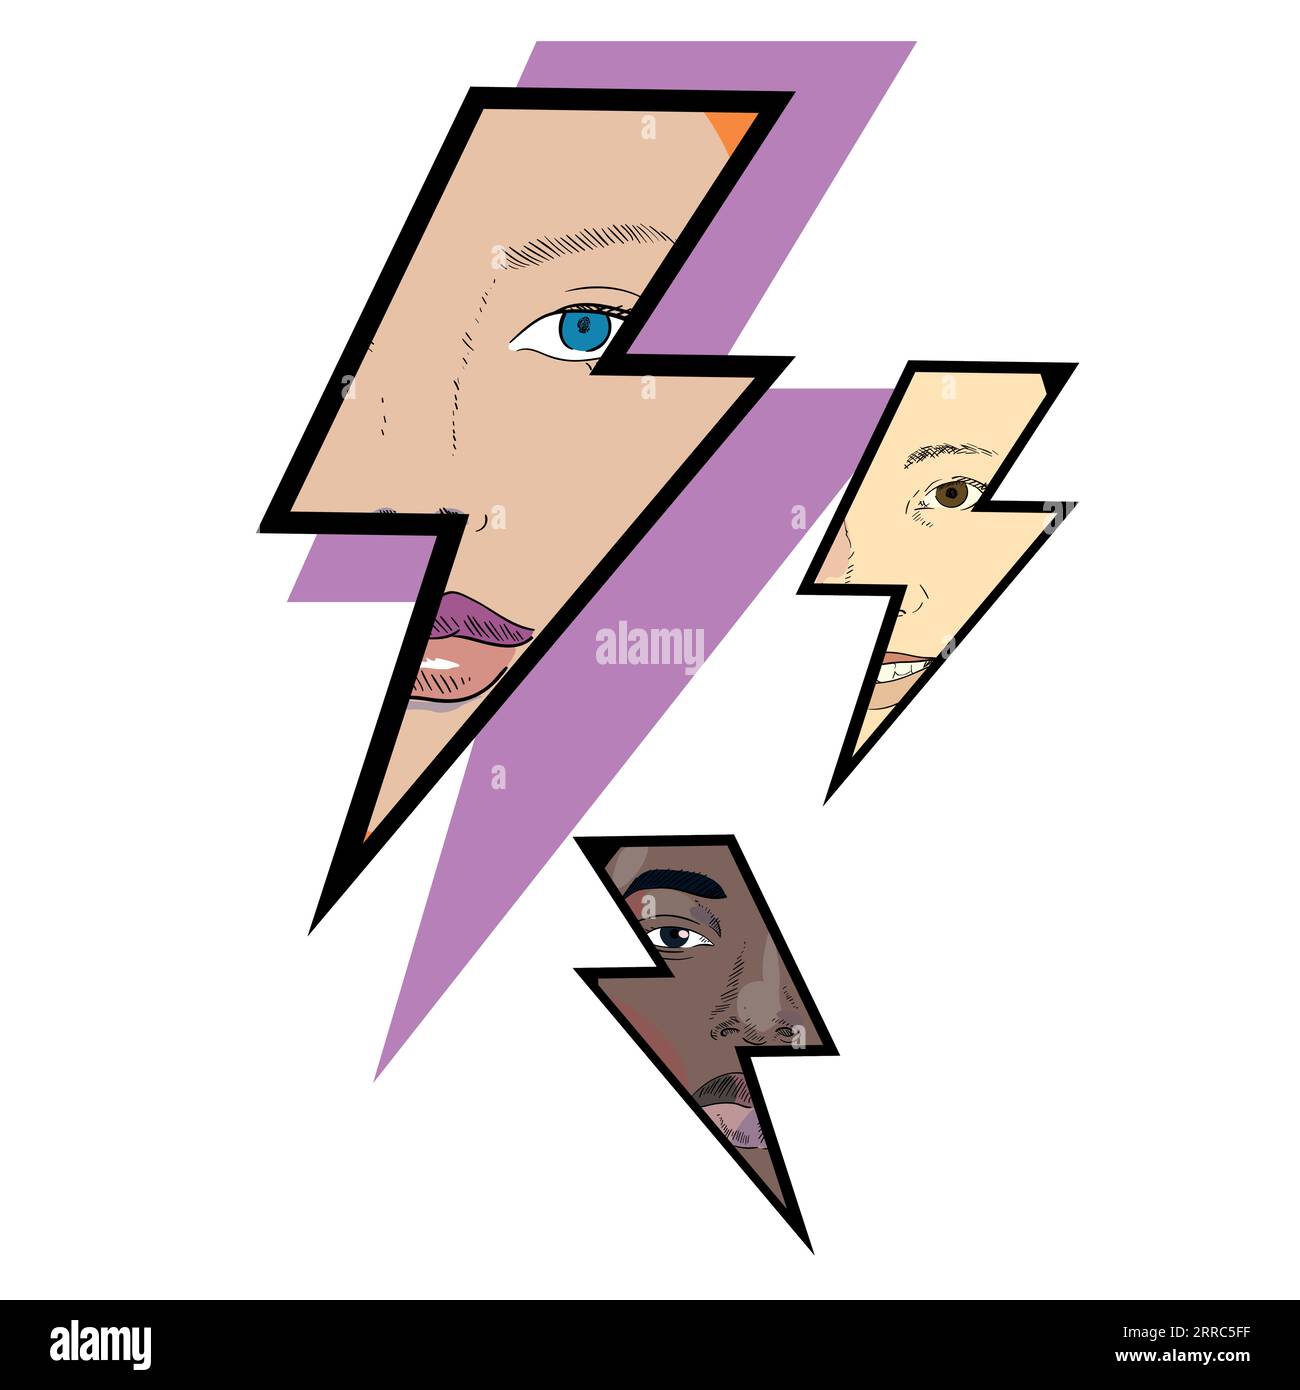 Design for thunderbolt symbols t-shirt with faces of women of different races. Vector illustration about feminist struggles and tolerance. Stock Vector